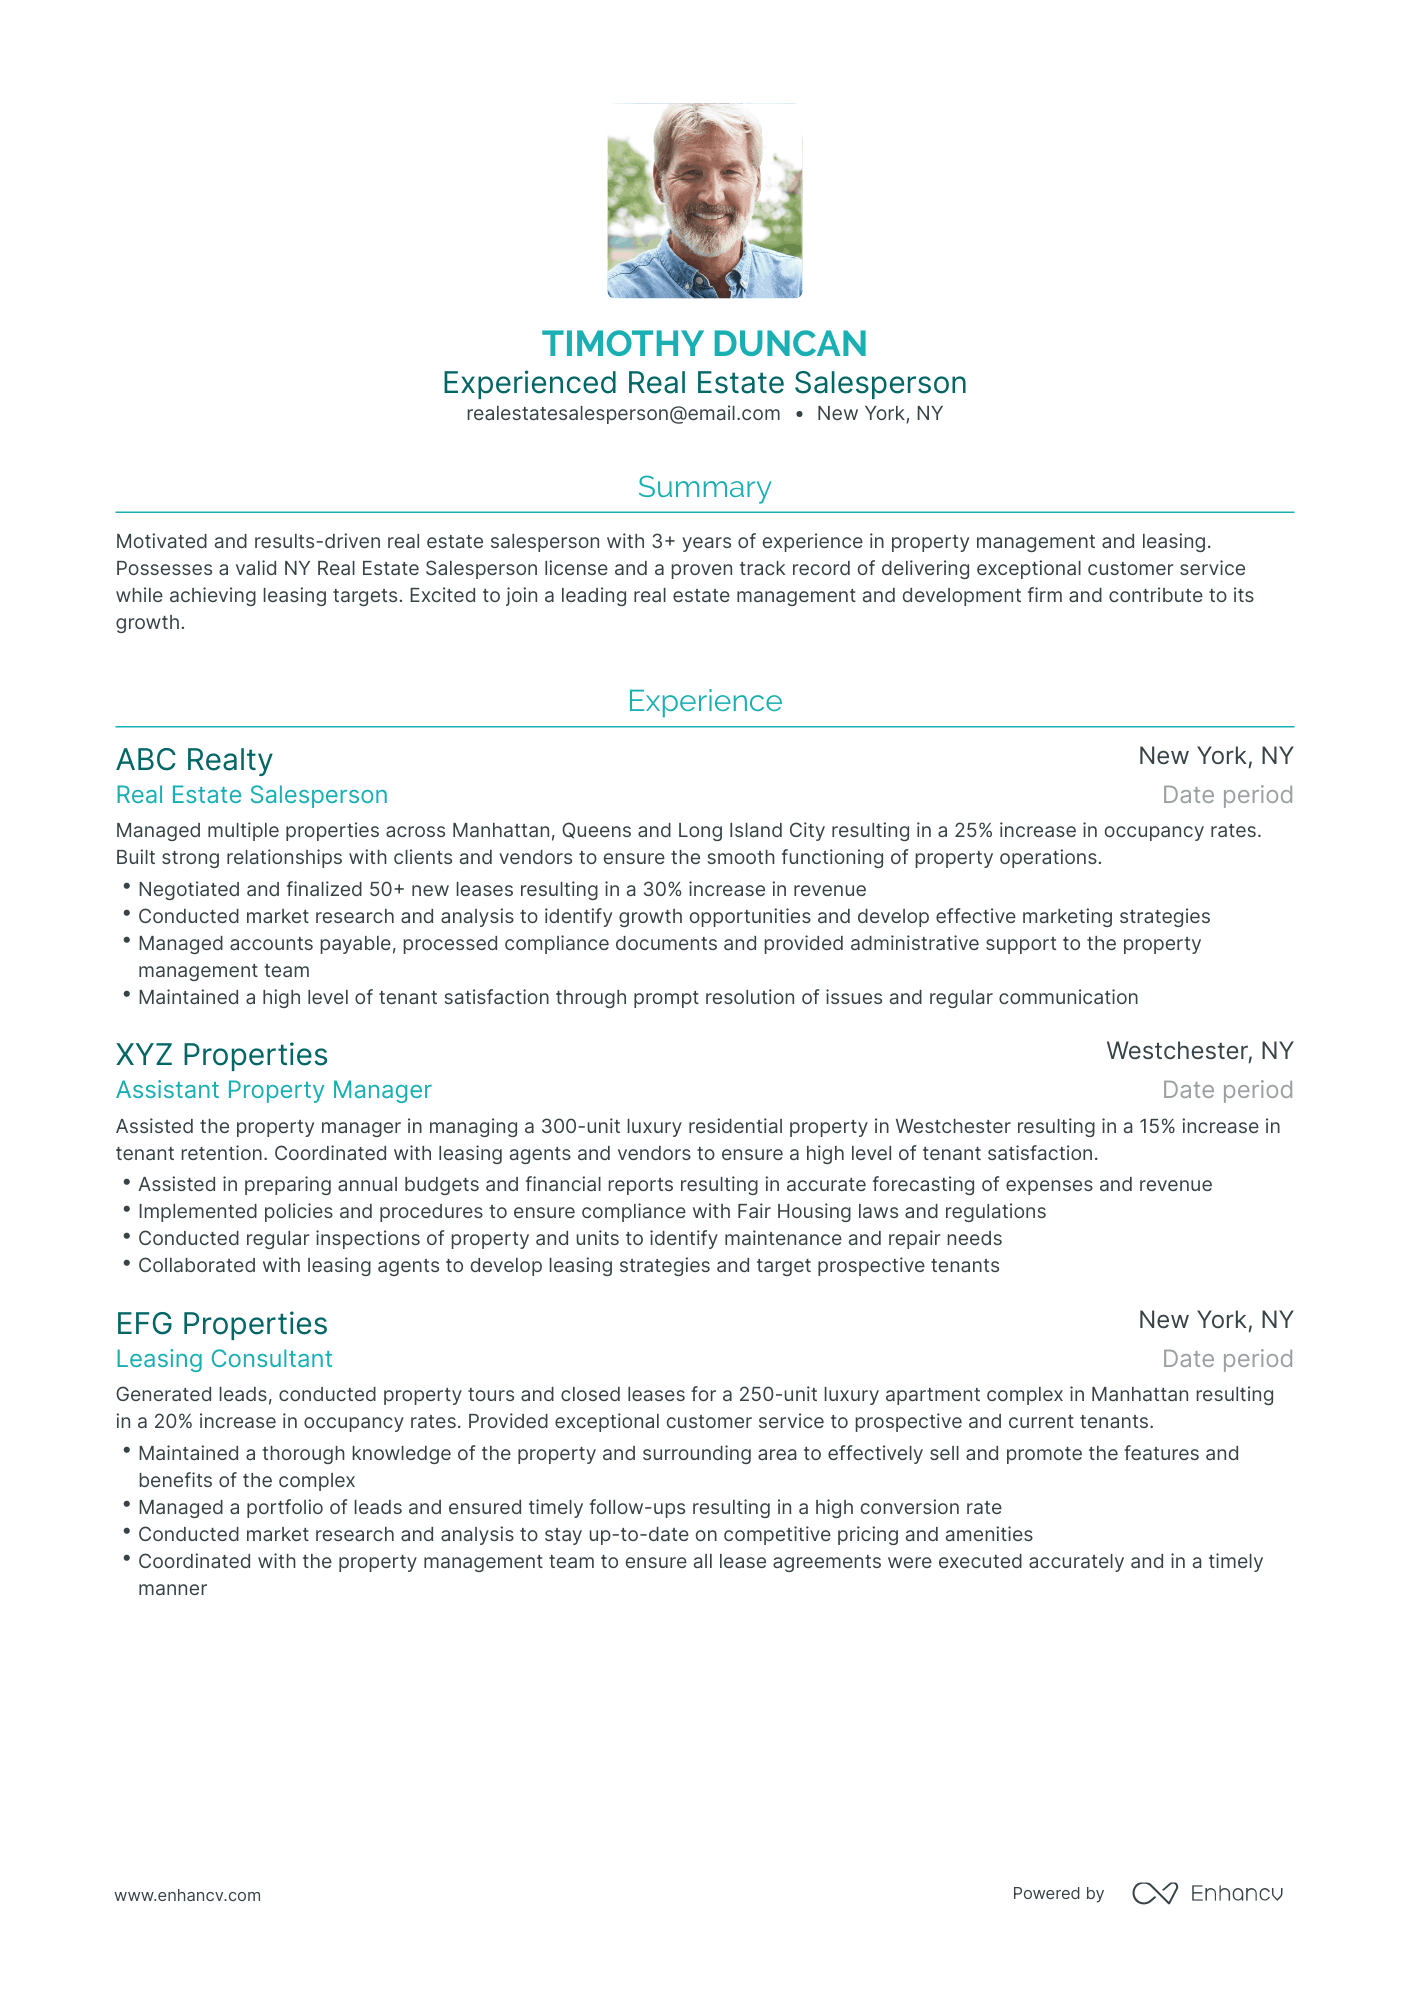 Traditional Real Estate Salesperson Resume Template